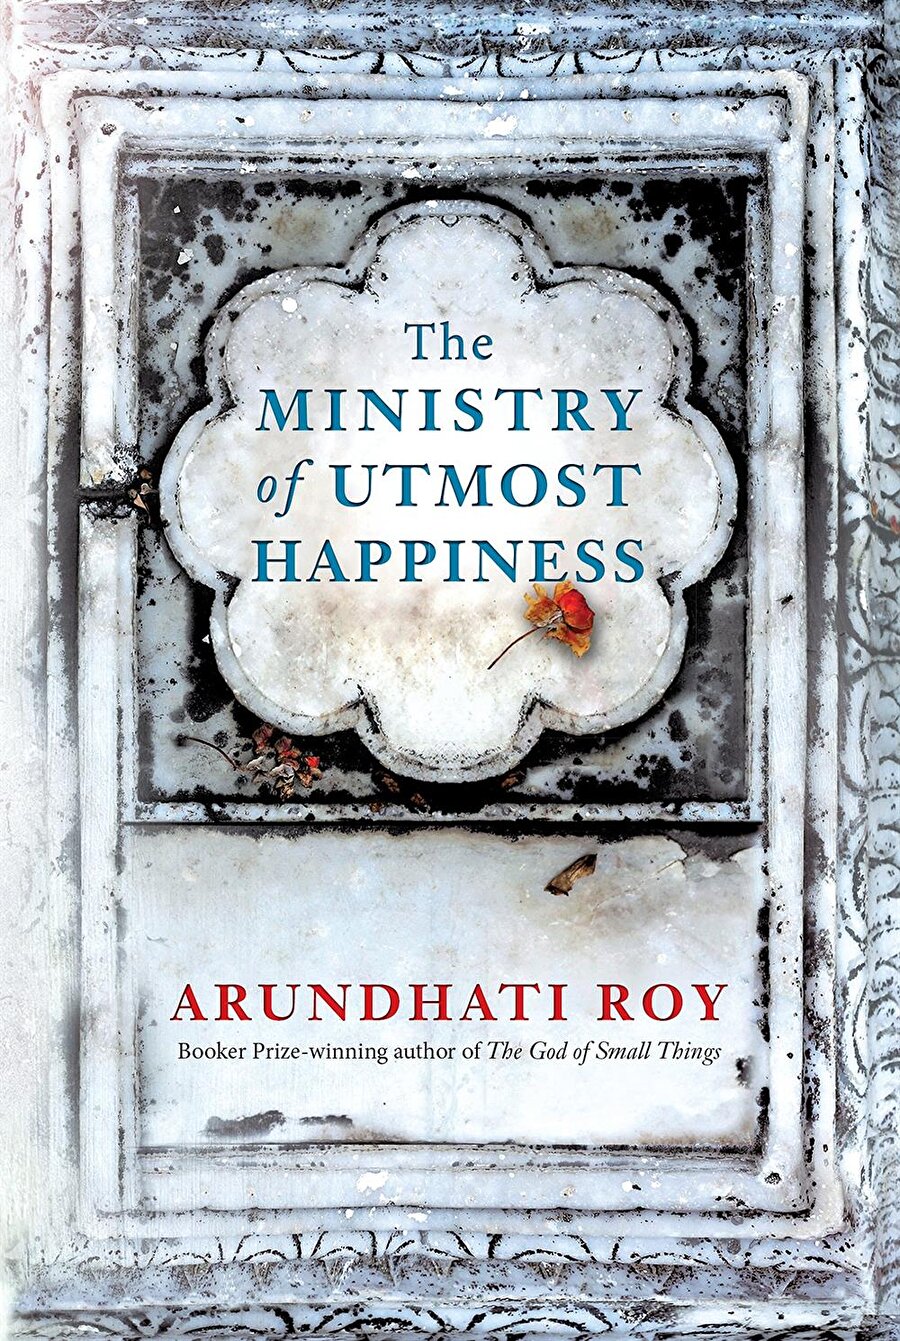 Arundhati Roy
"The Ministry of Utmost Happiness"